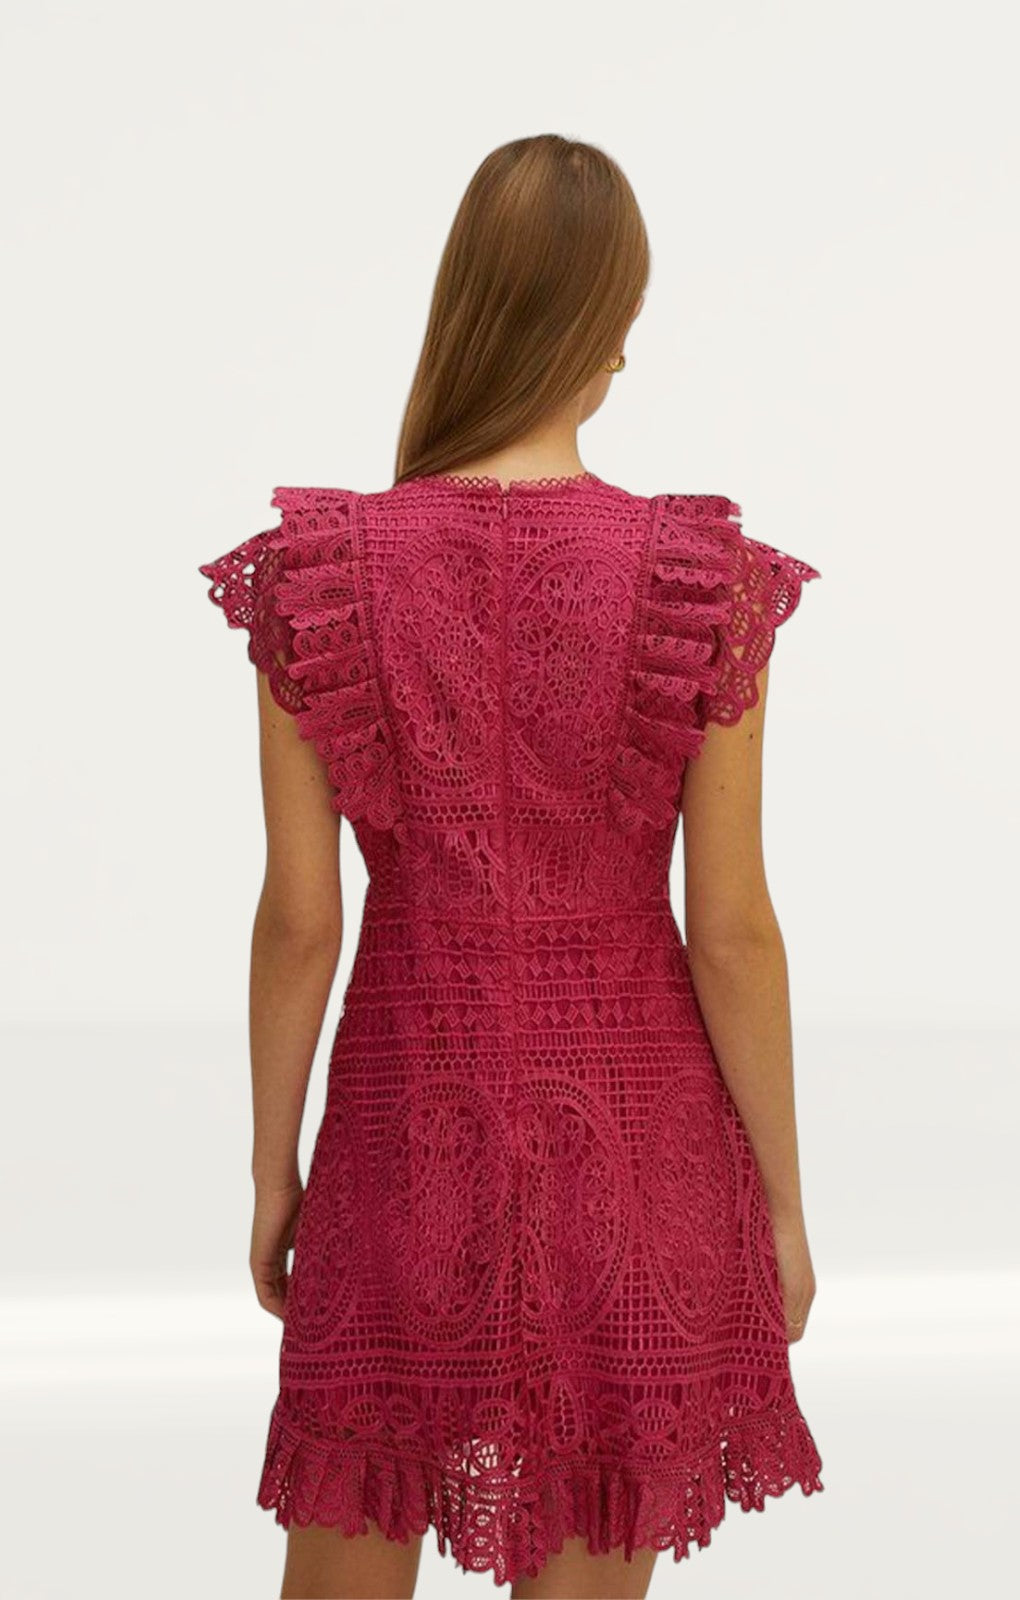 Oasis Frill Detail Lace Skater Dress product image